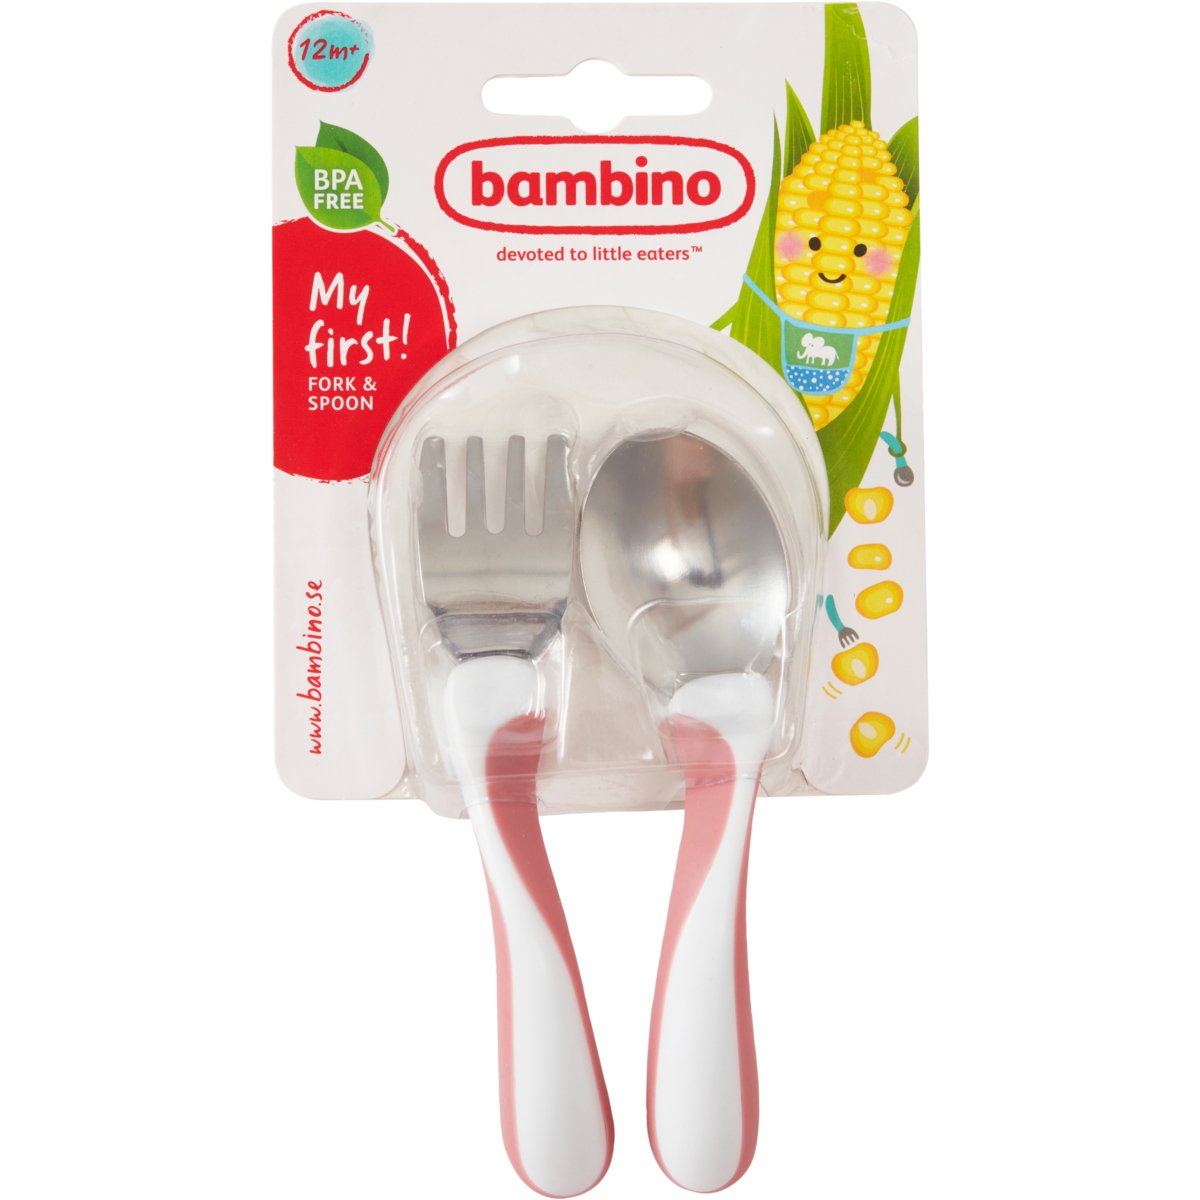 Bambino My first! FORK & SPOON cerise